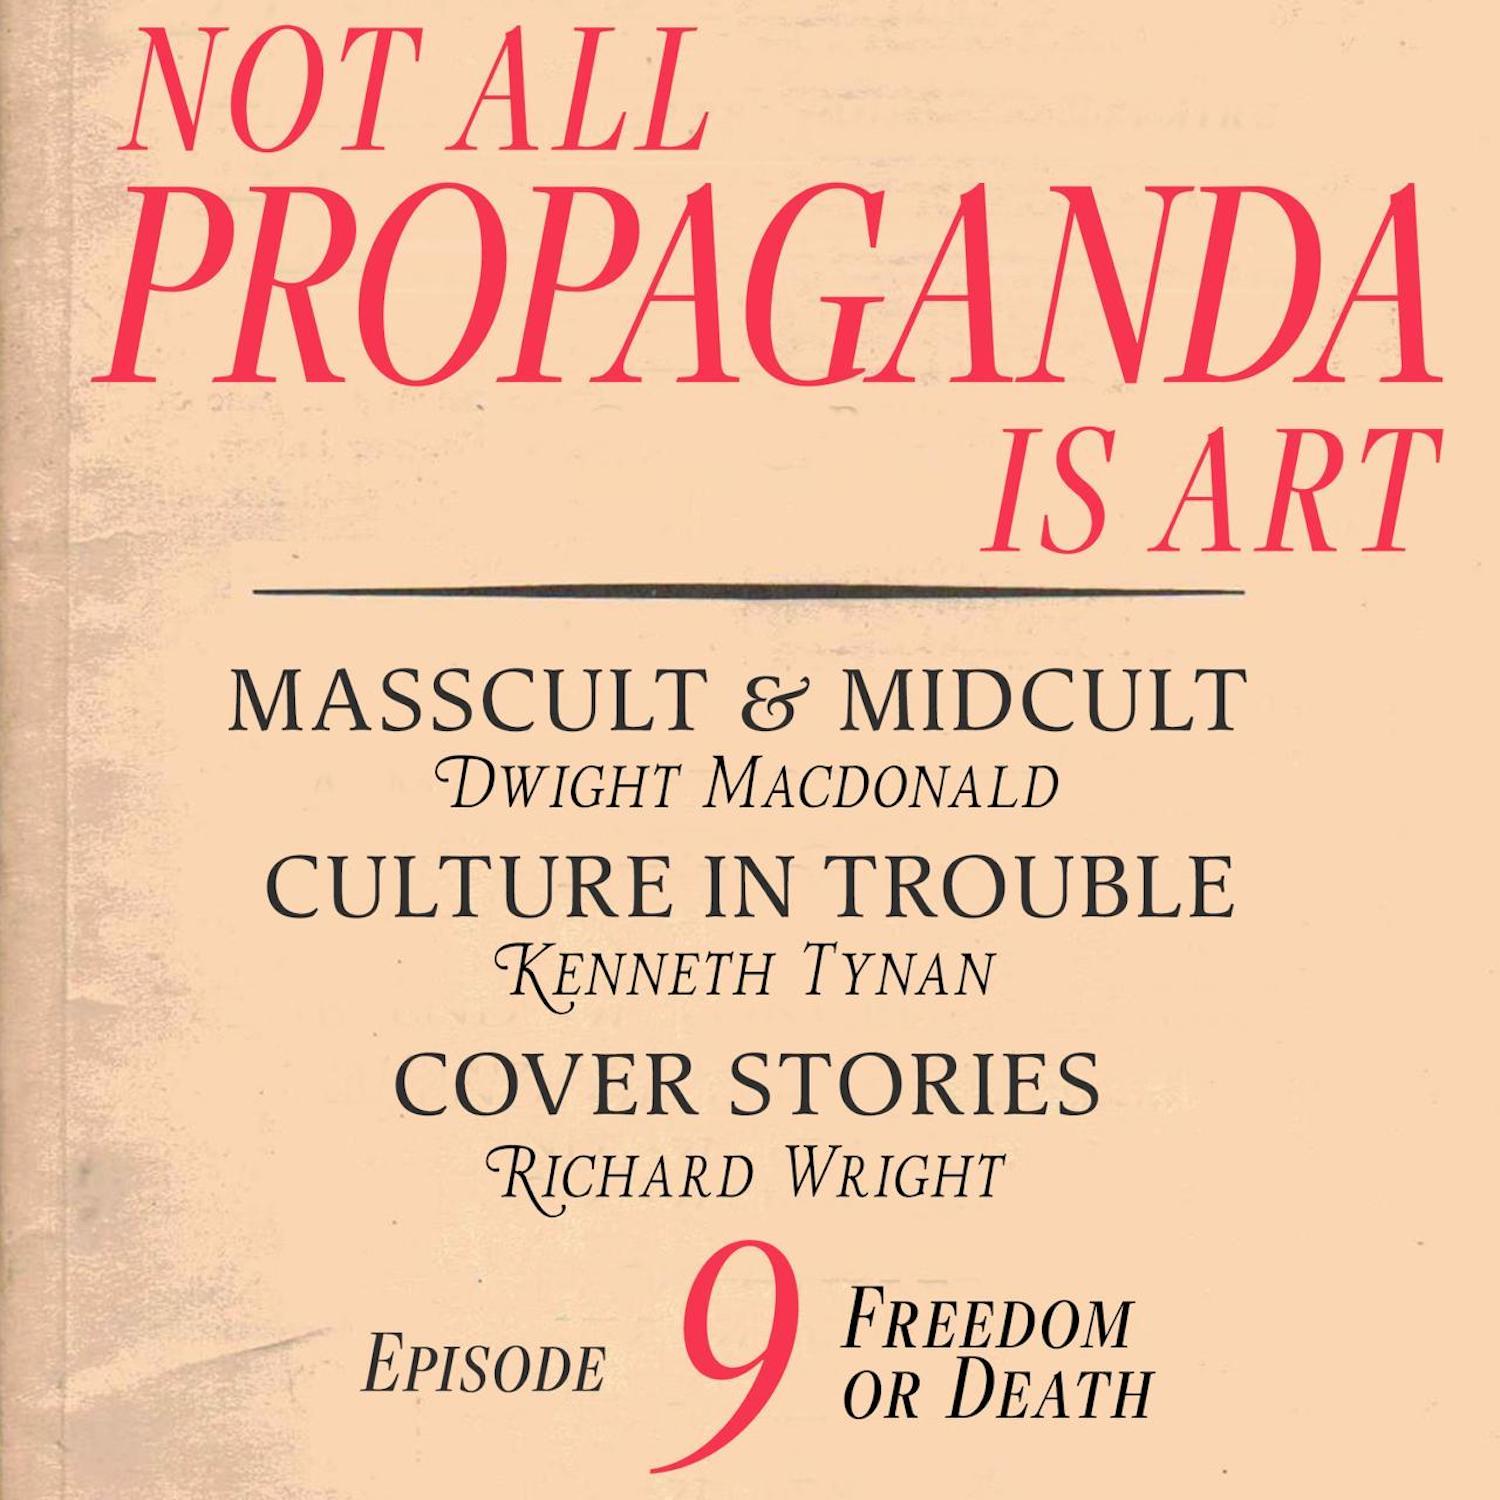 Thumbnail for "Not All Propaganda is Art 9: Freedom or Death".